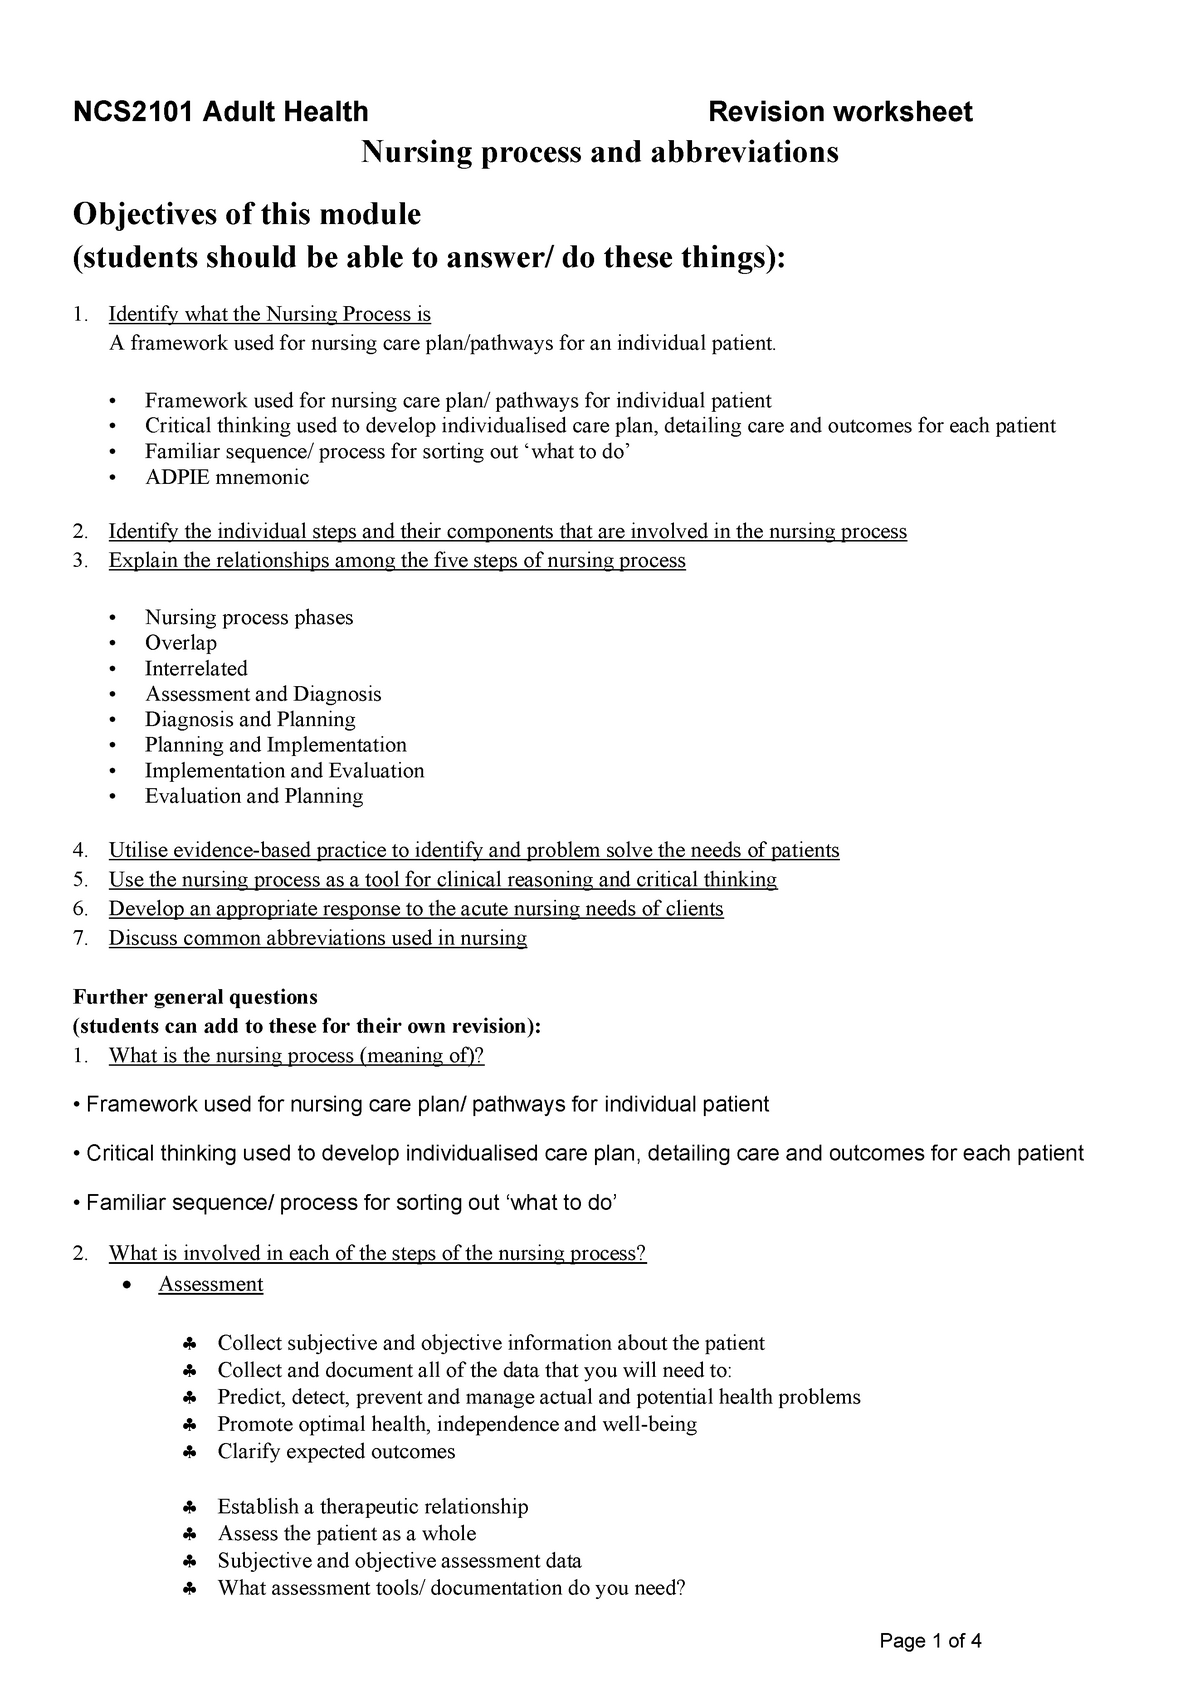 Revision Worksheet W1 Nursing Process And Abbreviations Ncs2101 Adult Health Revision